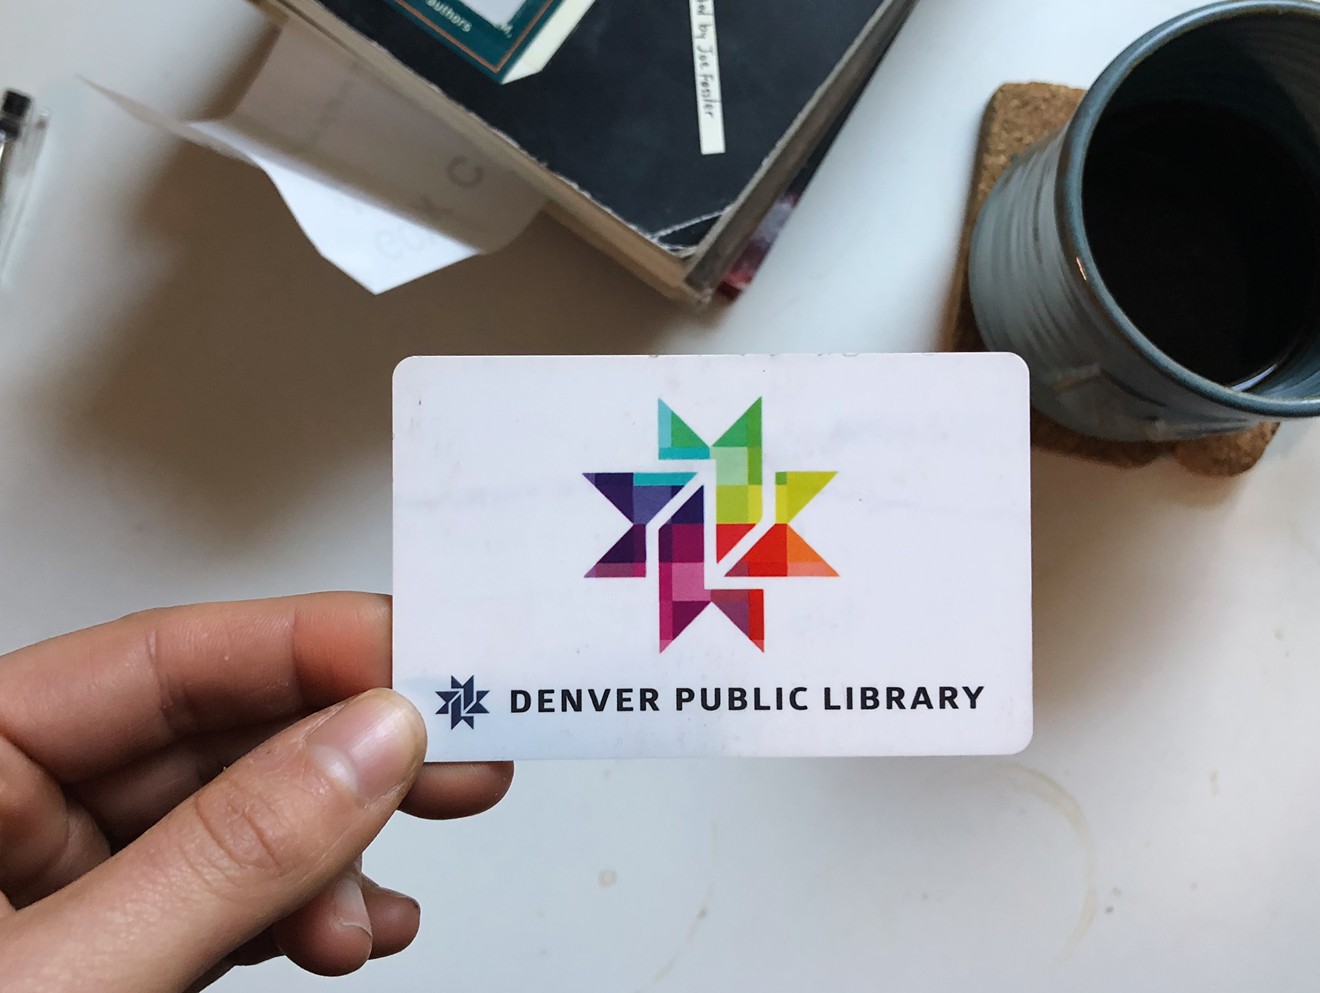 Denver Public Library cards are not to be underestimated.